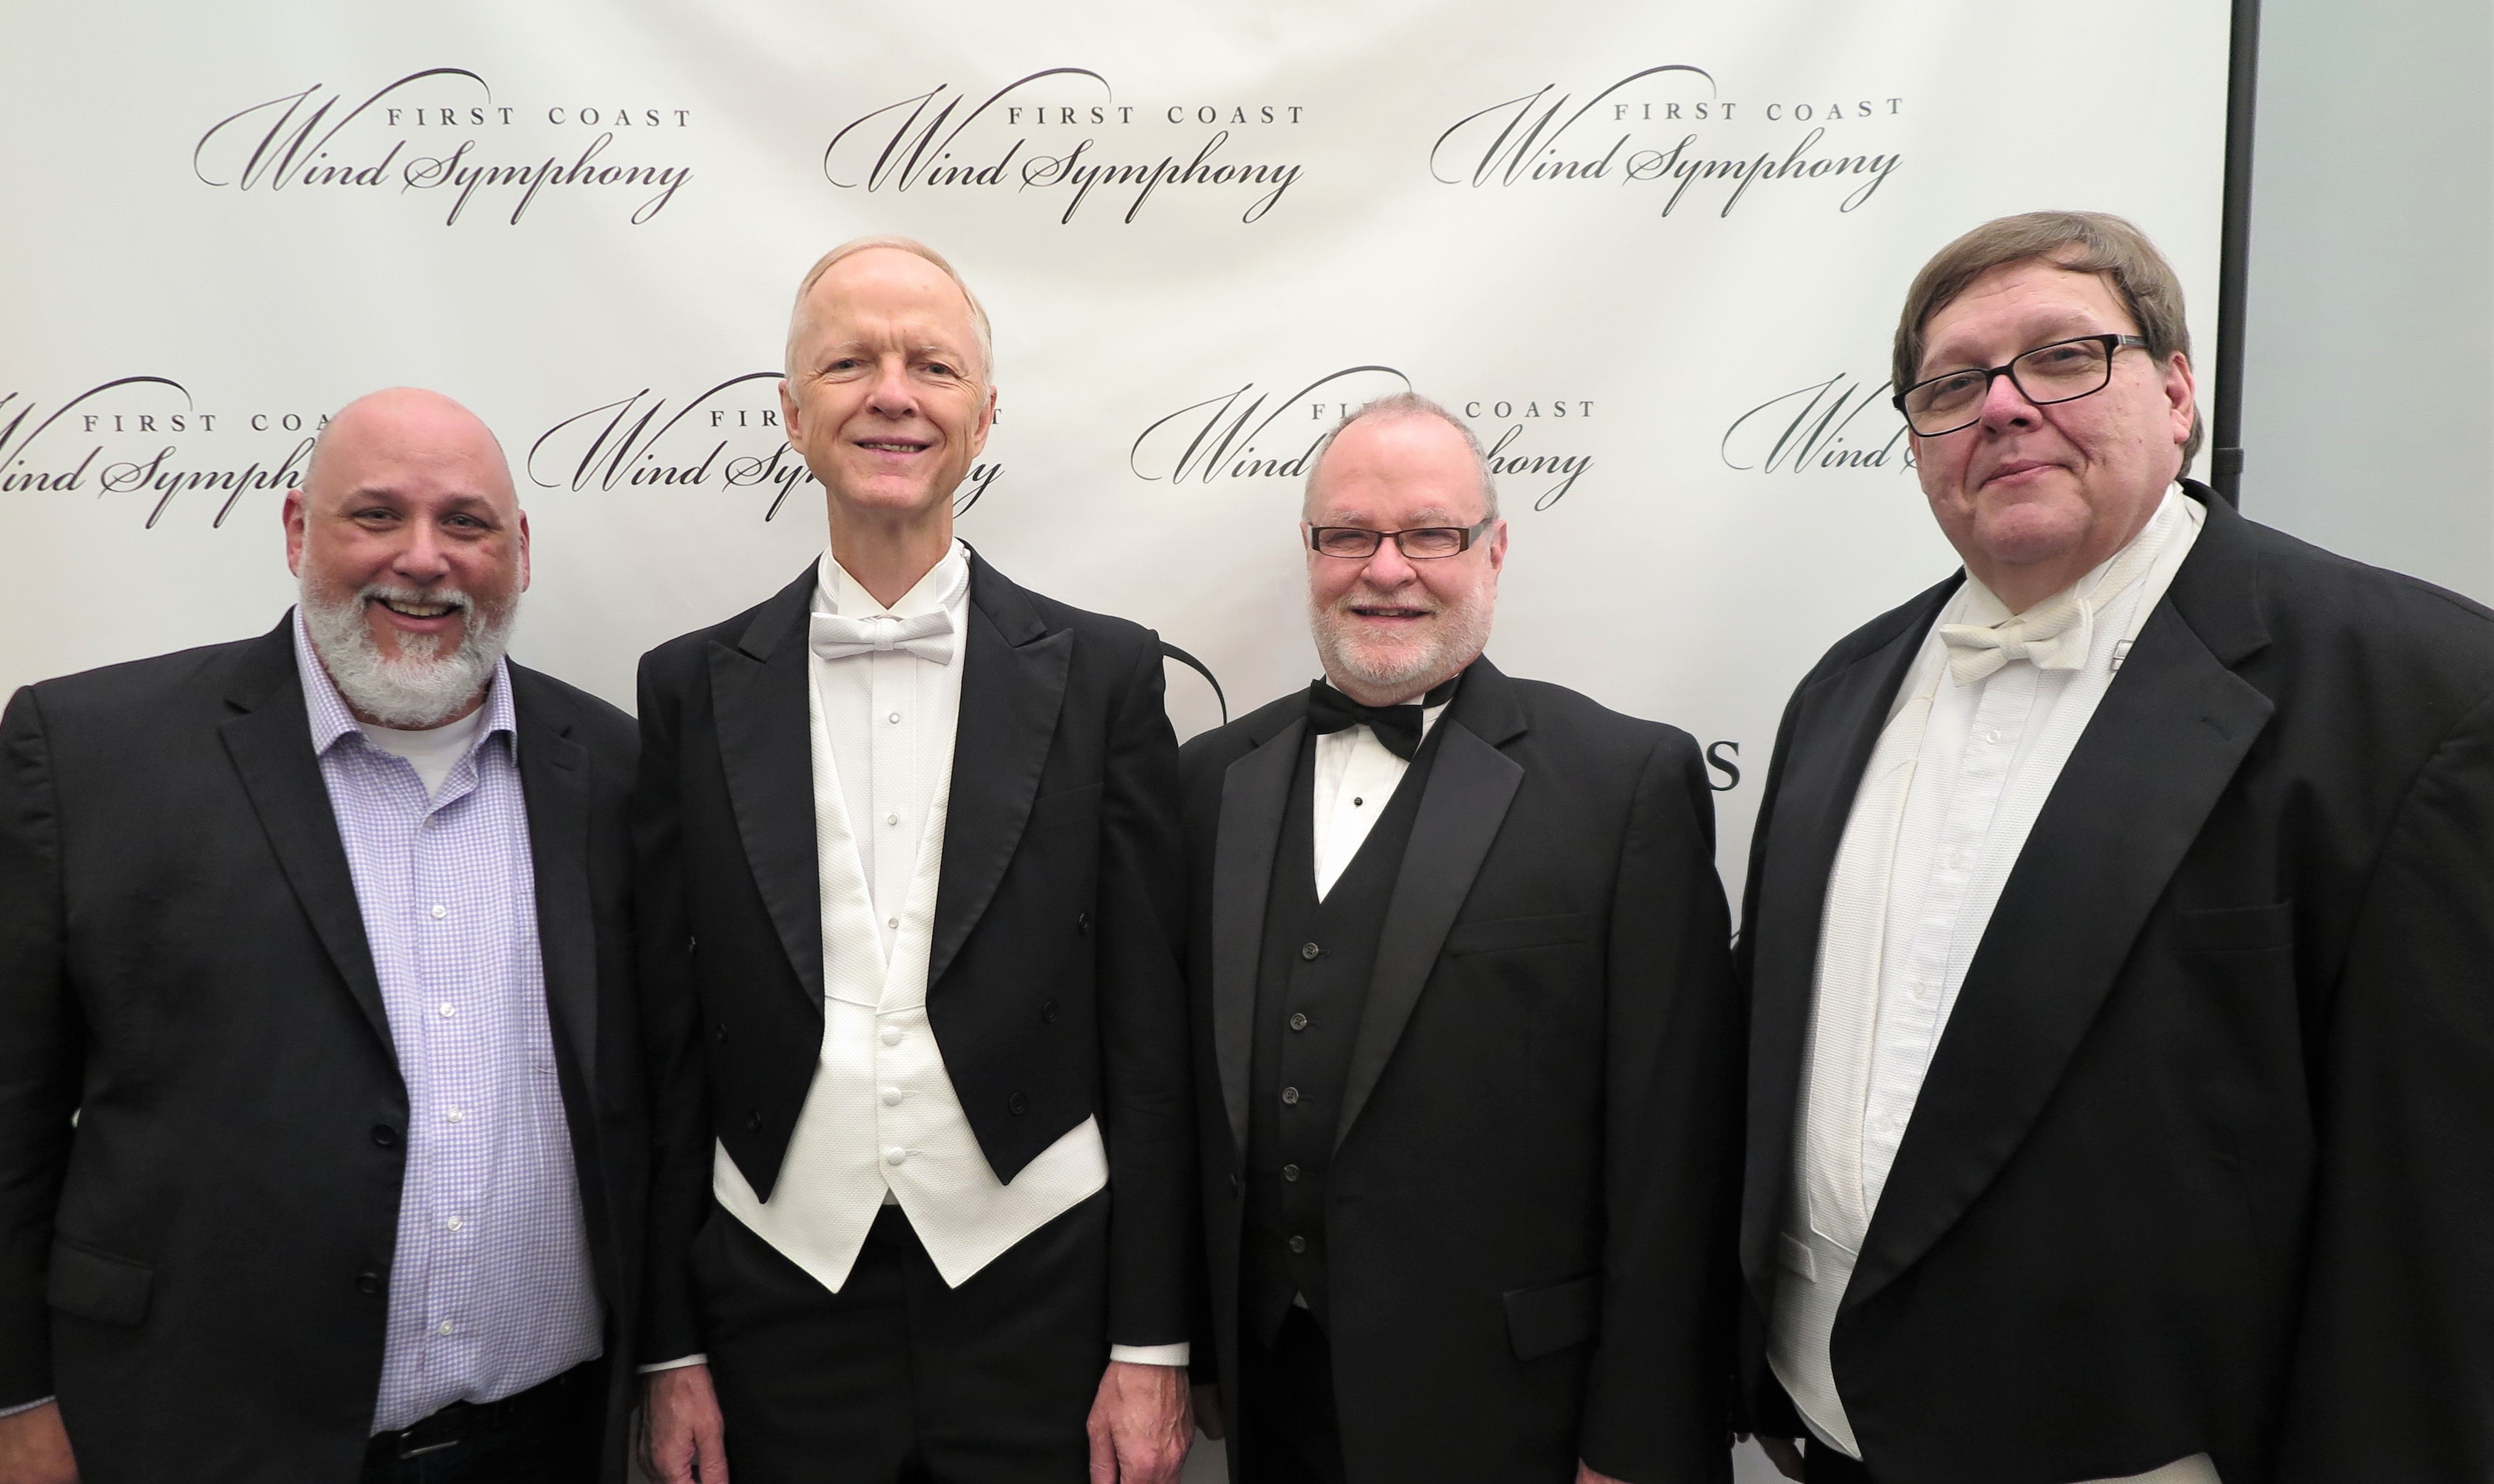 Conductors Creswell, Clifton, Sheldon, Weikle